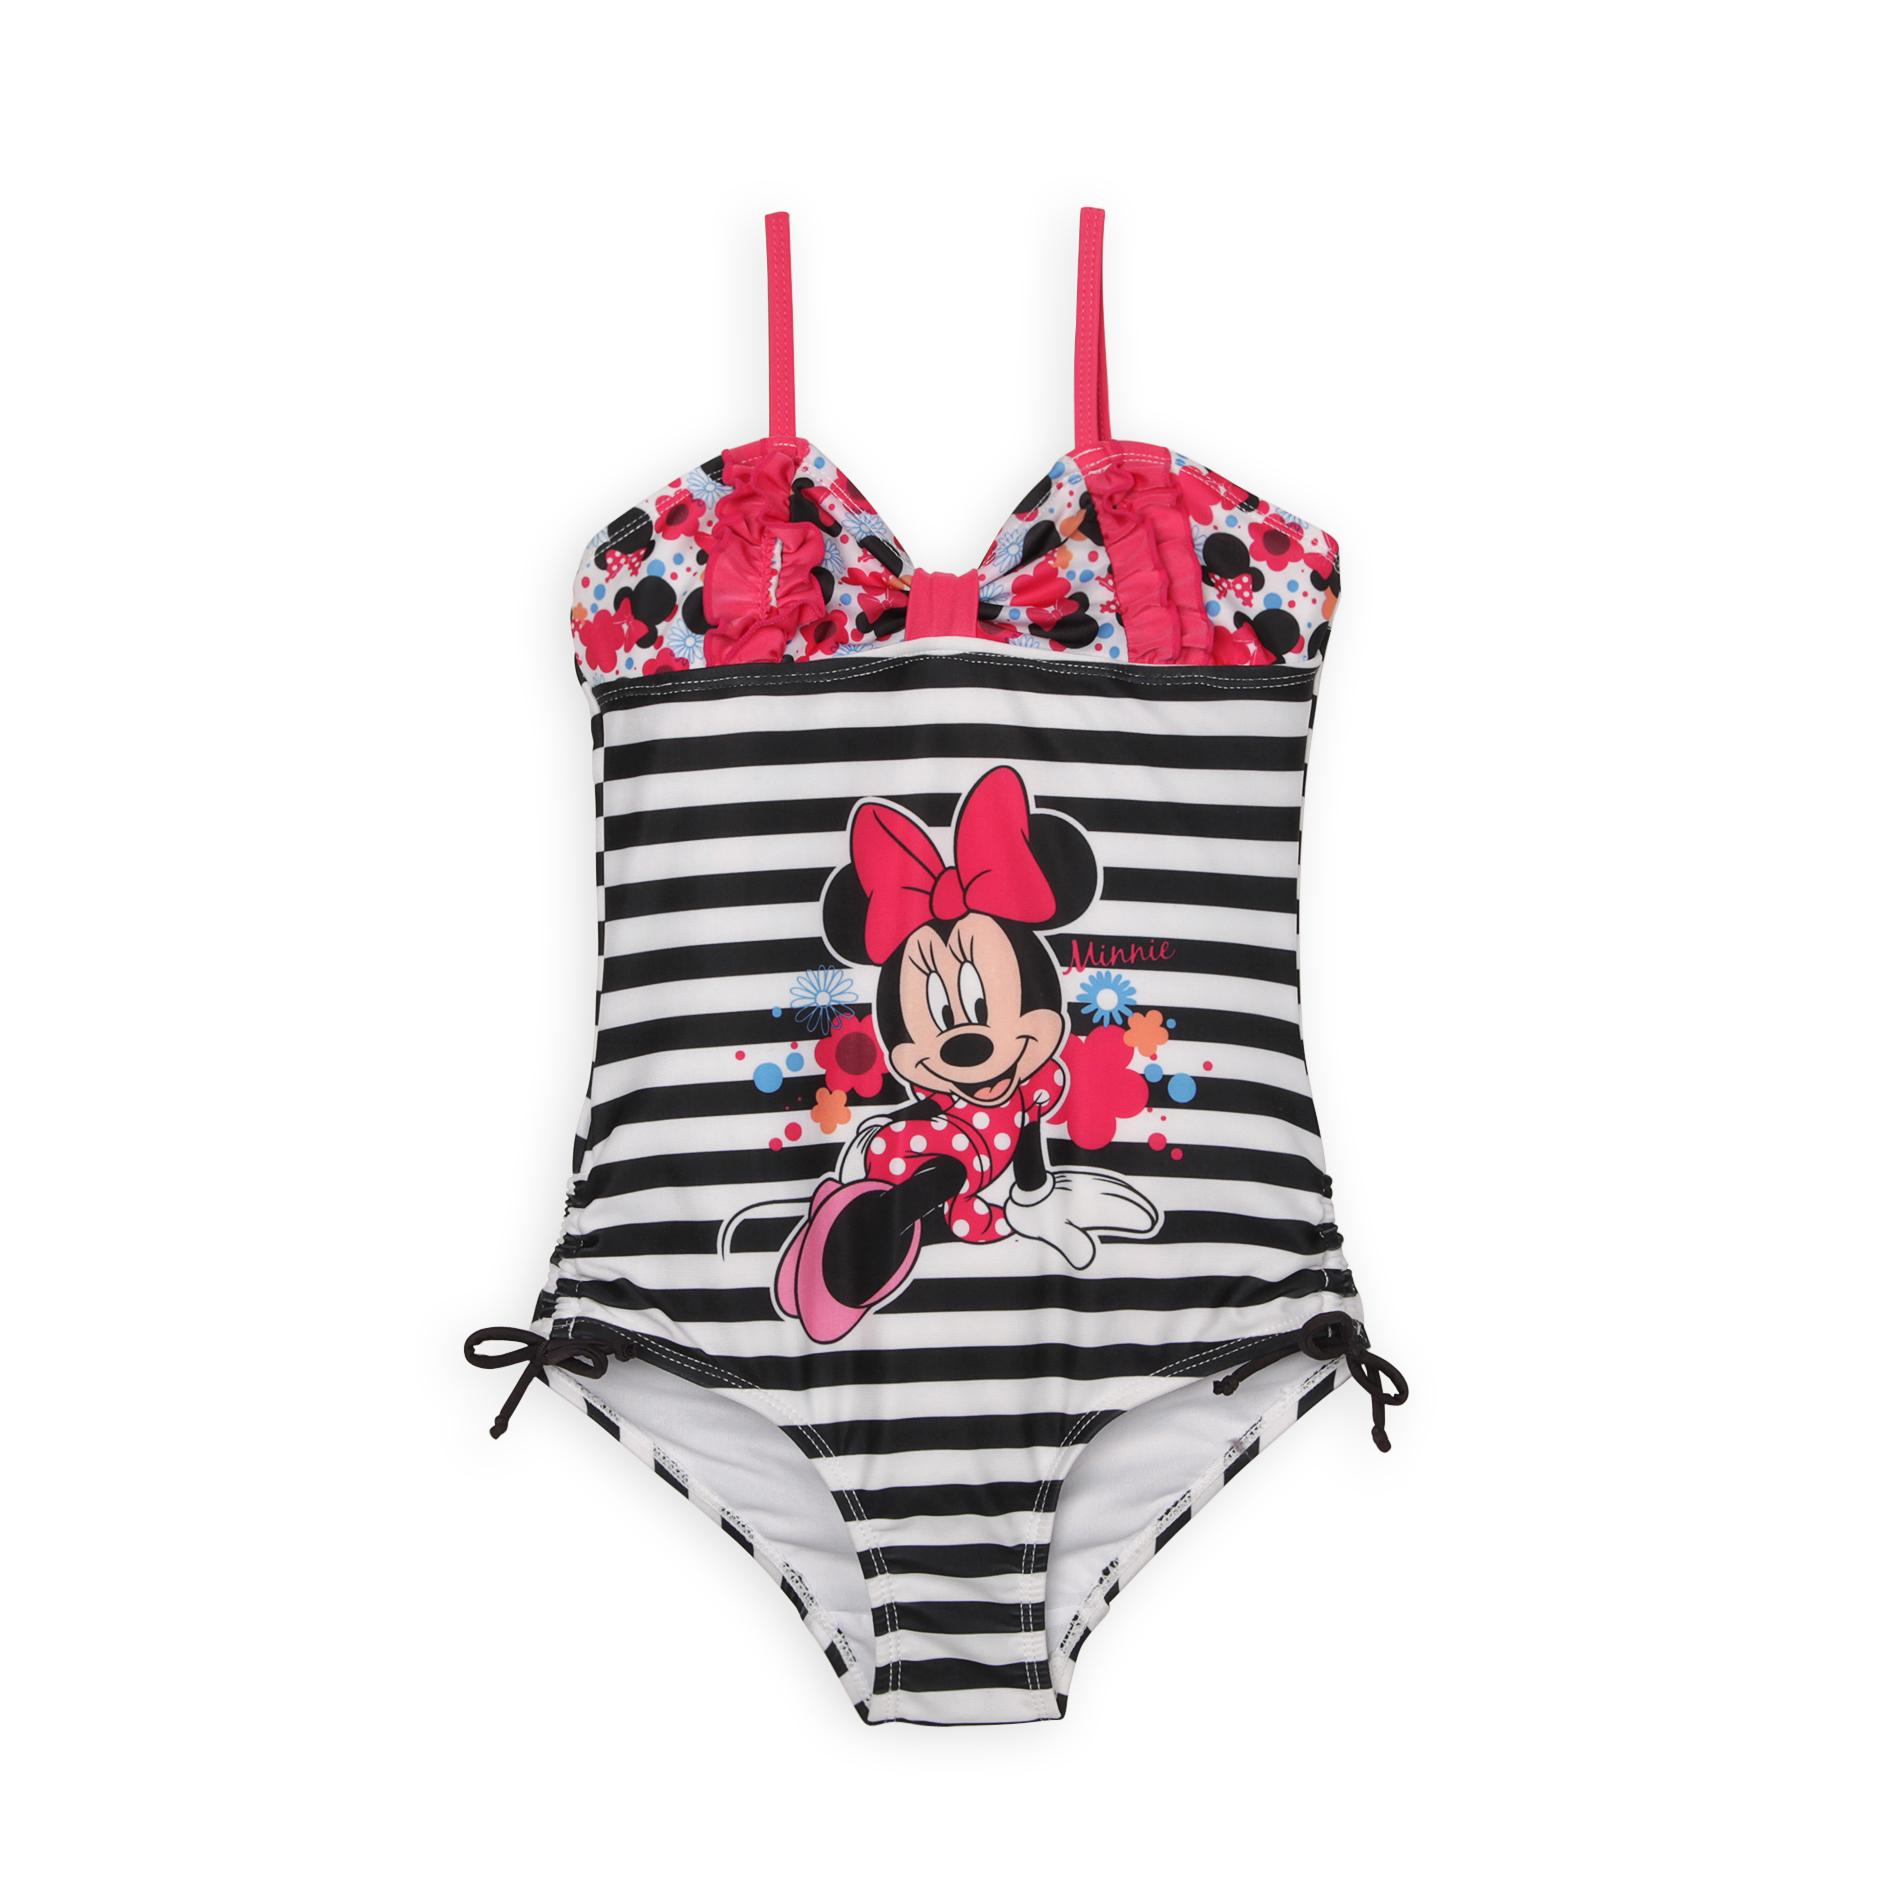 Disney Girl's Ruched Swimsuit - Minnie Mouse